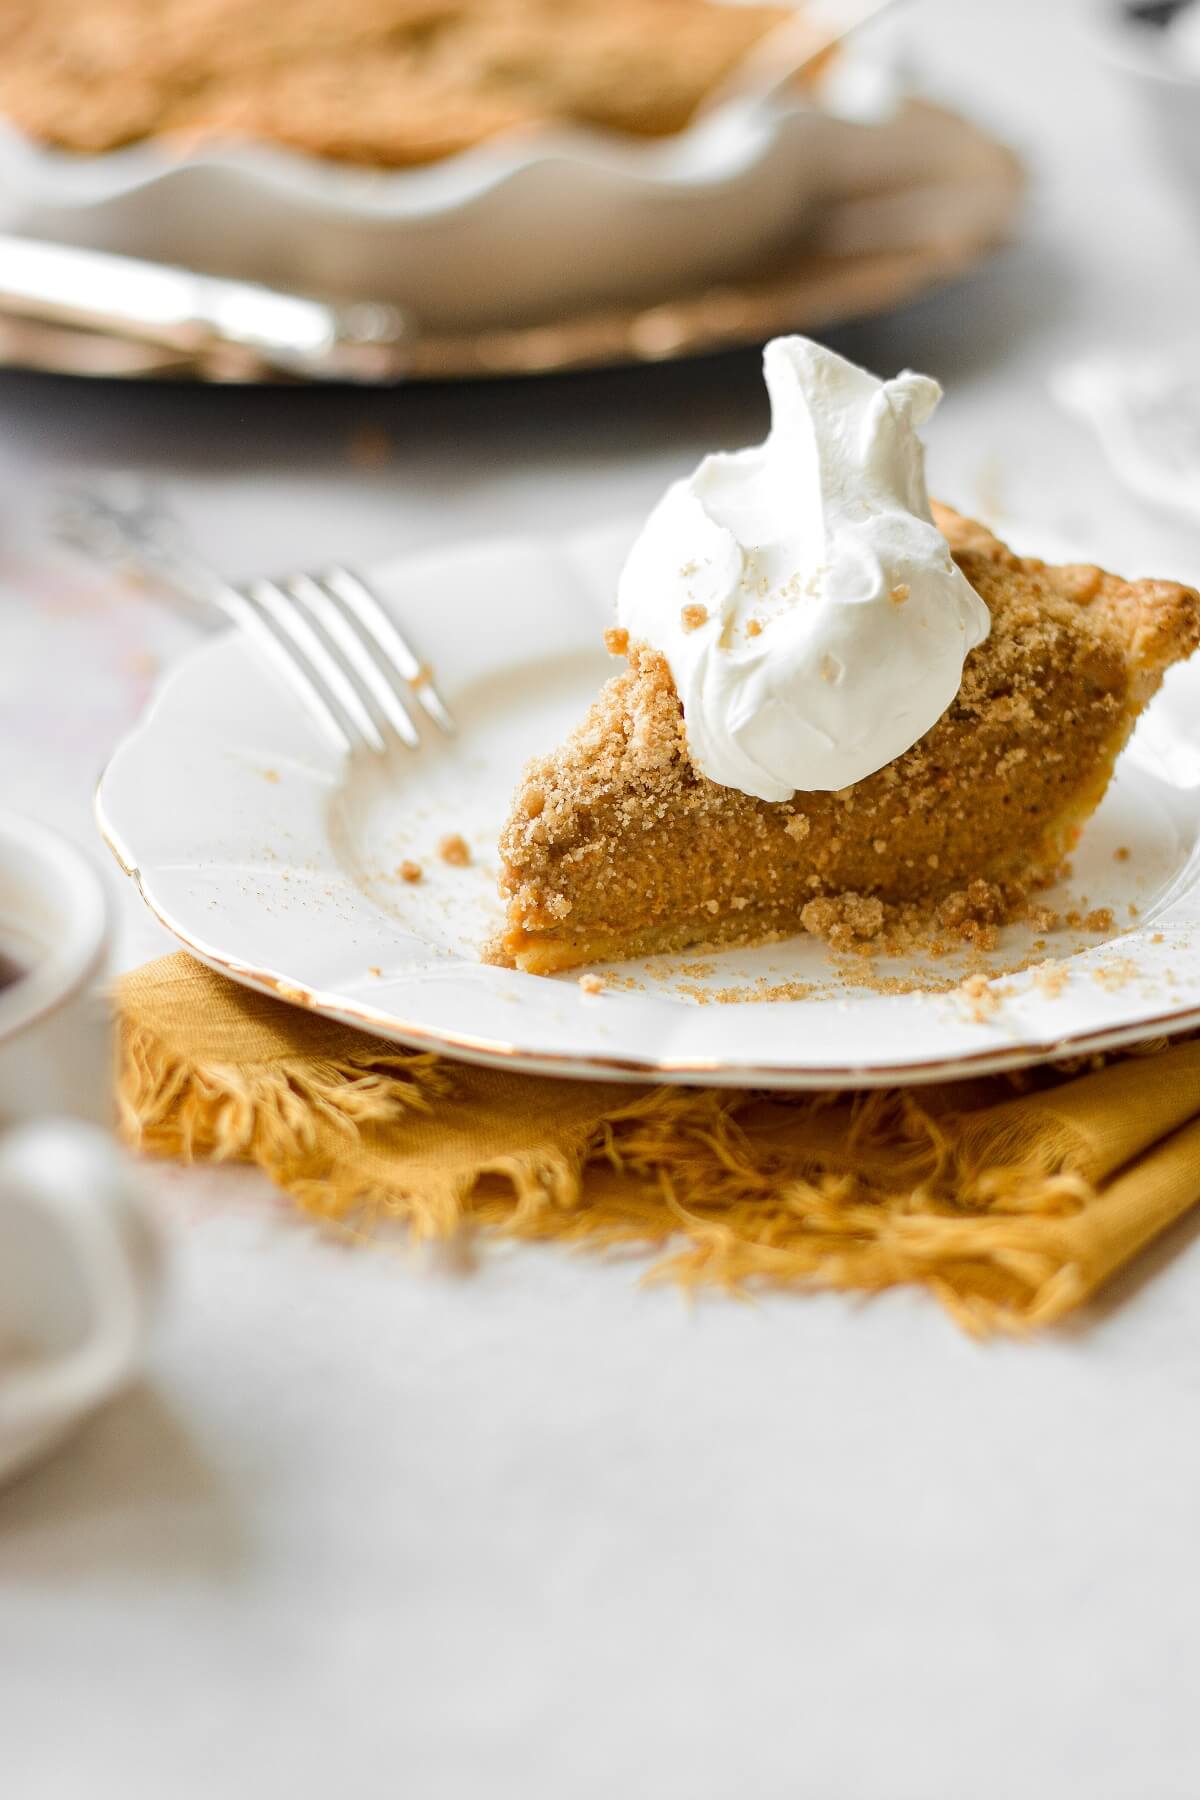 A slice of pumpkin bourbon crumble pie on a white plate, topped with whipped cream, with a yellow linen napkin tucked under the plate.